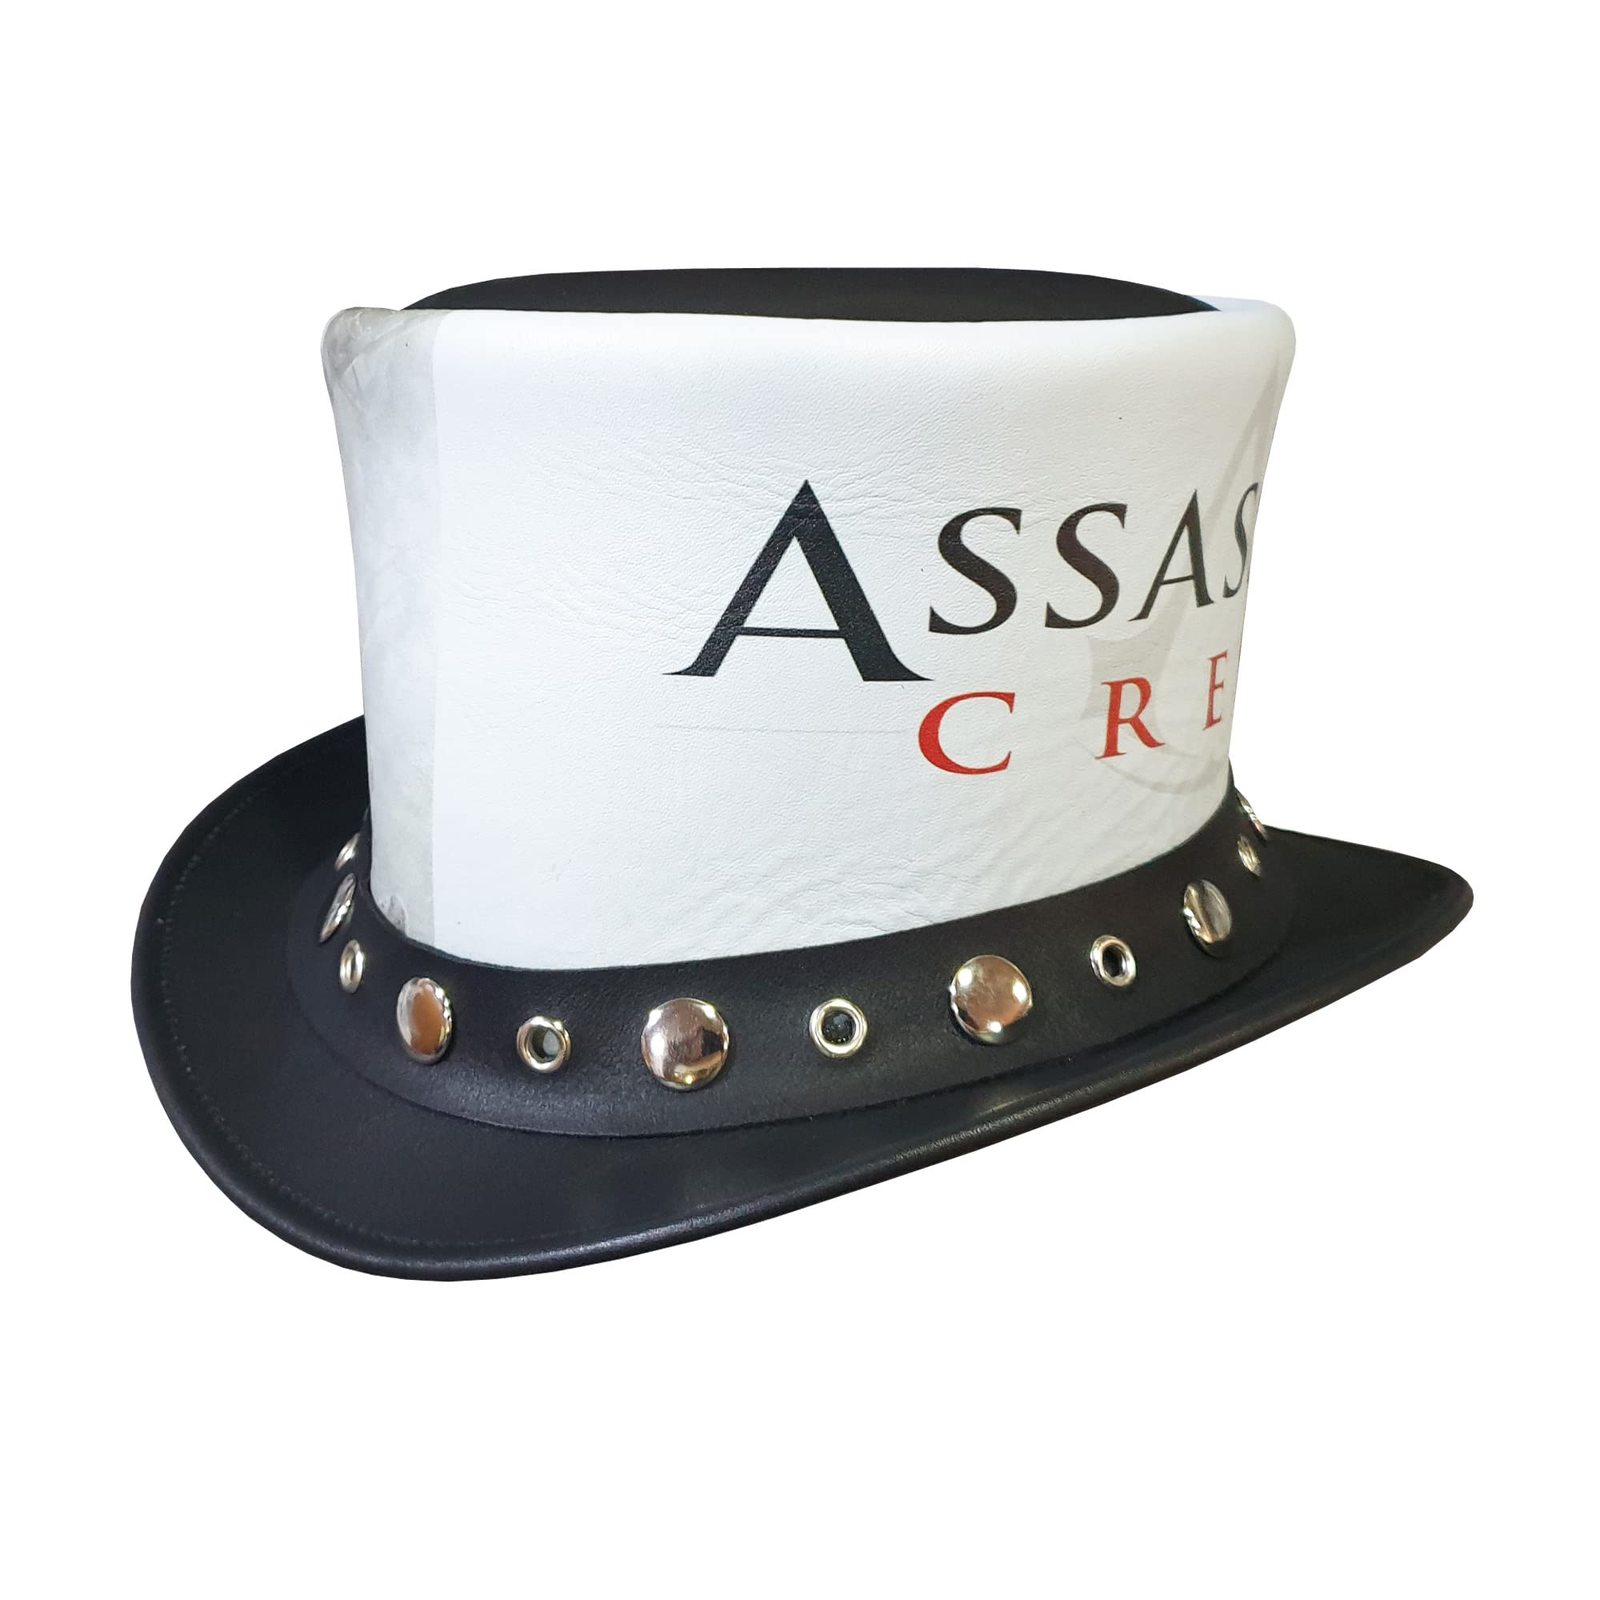 Assassins Creed Theme Crown Leather Top Hat  - $285.00